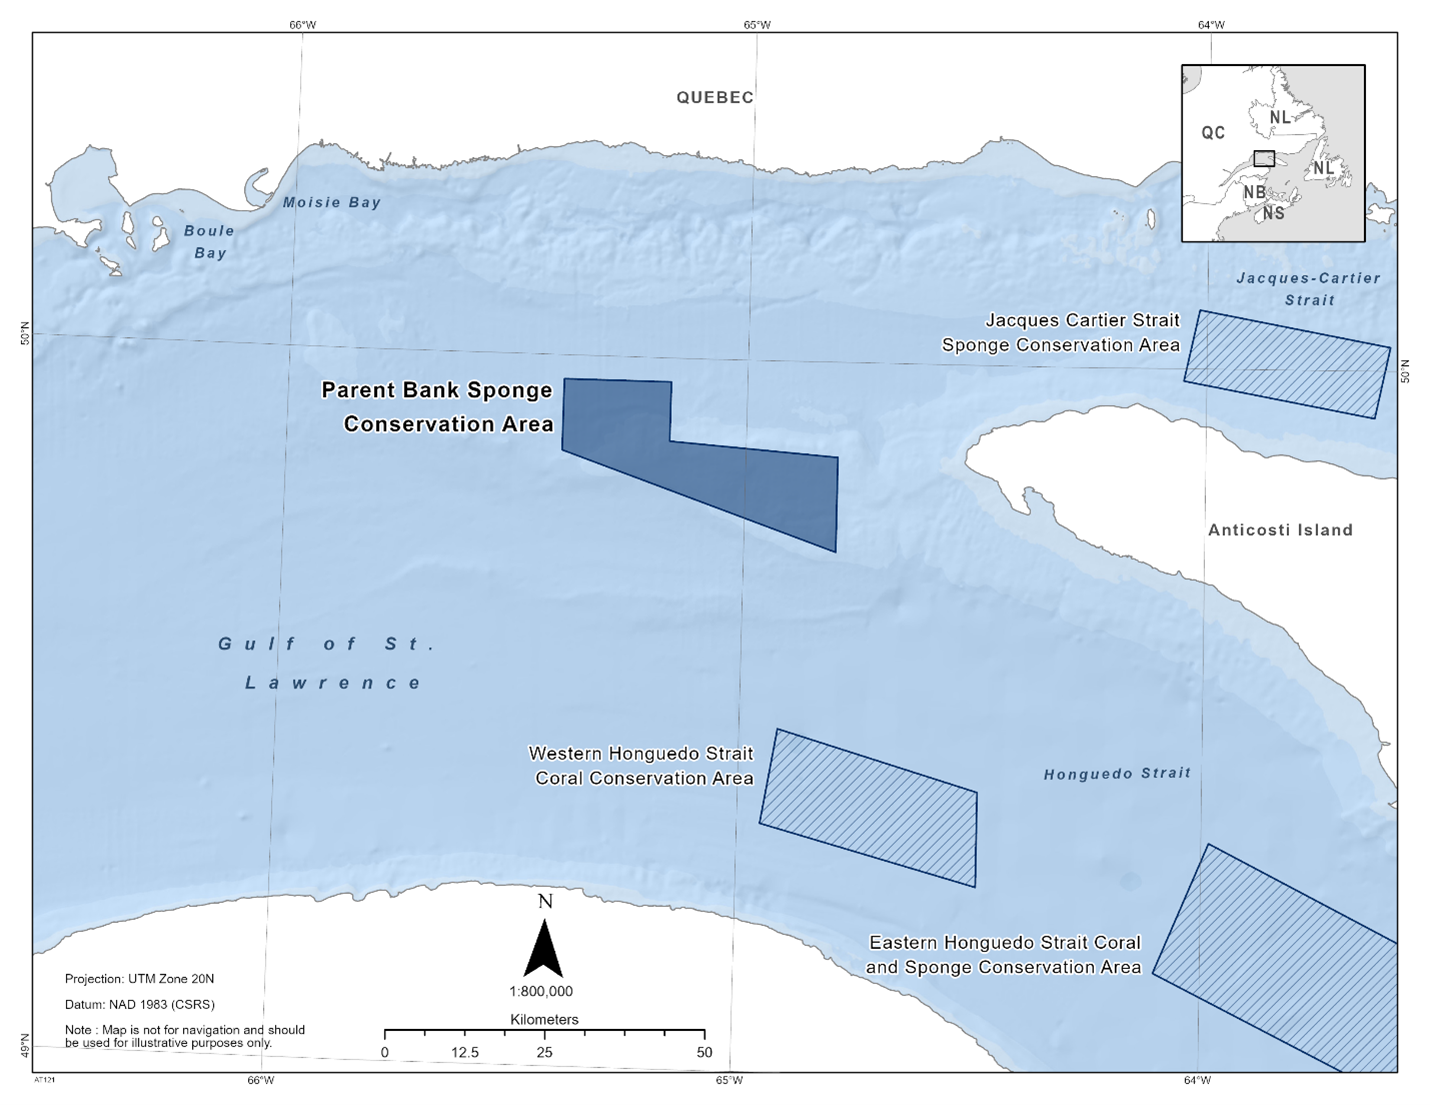 Map of the Parent Bank Sponge Conservation Area depicted in dark blue. The map also features the marine refuges nearby with dark blue diagonal lines (Western Honguedo Strait Coral Conservation Area, Eastern Honguedo Strait Coral and Sponge Conservation Area, Jacques Cartier Strait Sponge Conservation Area).